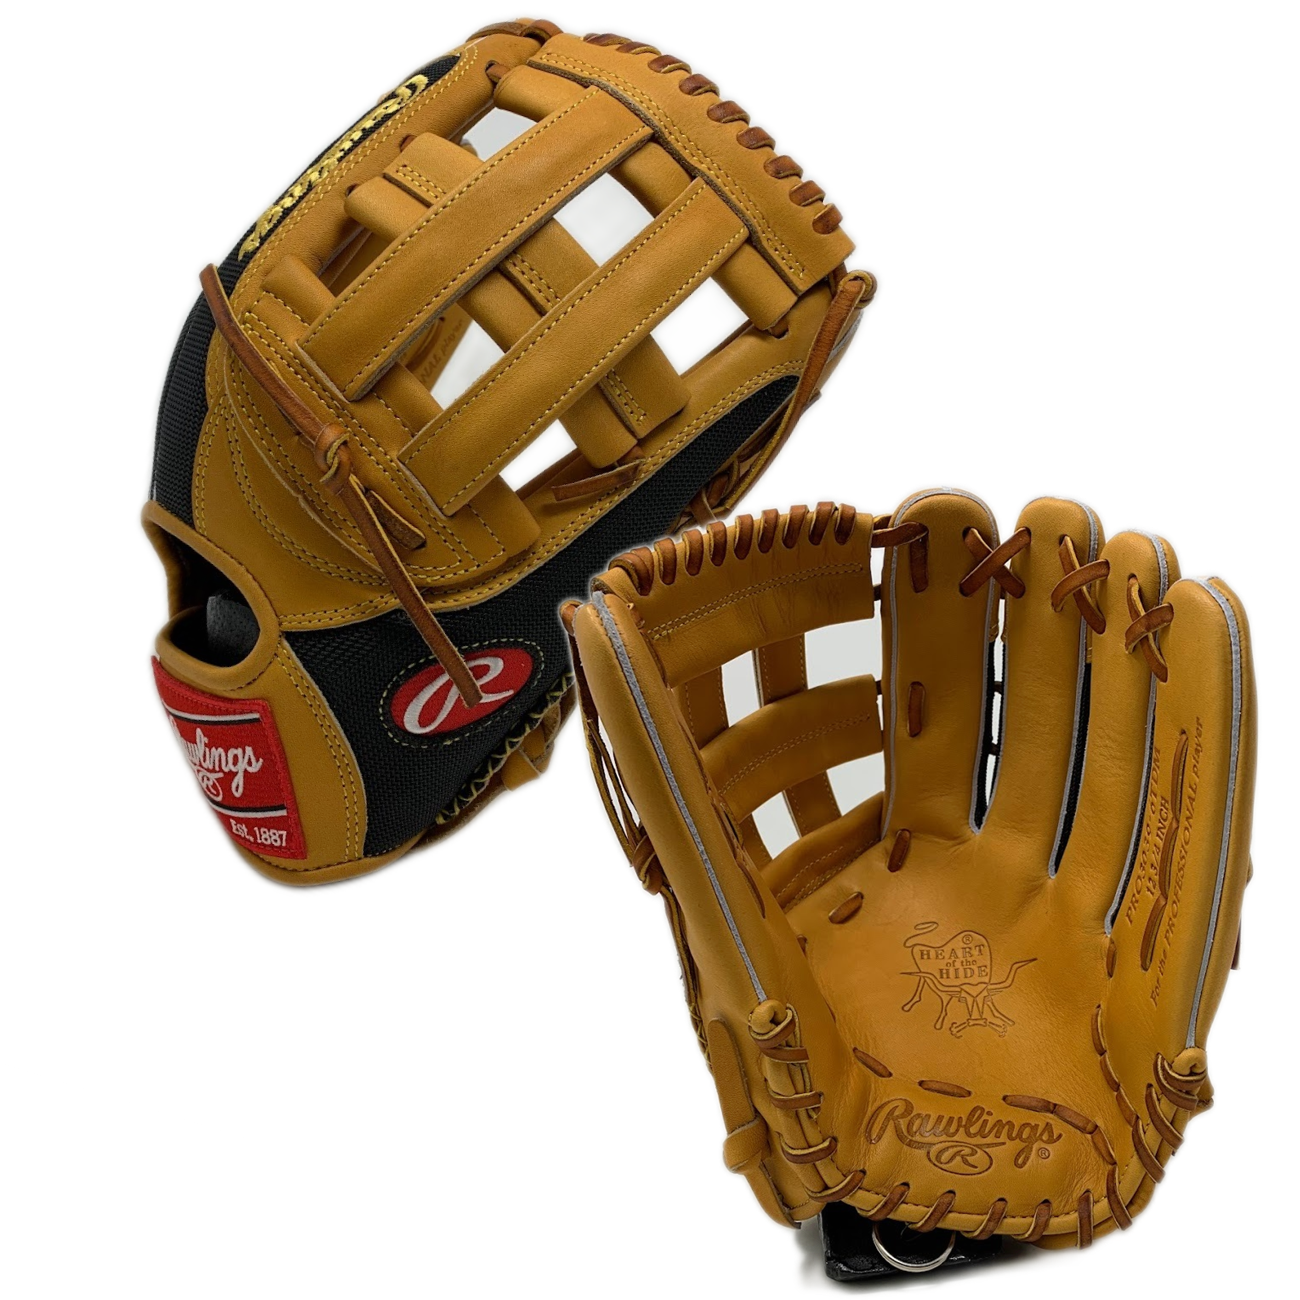 rawlings-heart-of-the-hide-12-75-inch-baseball-glove-303-deco-mesh-pro-h-web-right-hand-throw PRO3039-6TDM-RightHandThrow Rawlings    Constructed from Rawlings world-renowned Heart of the Hide steer leather